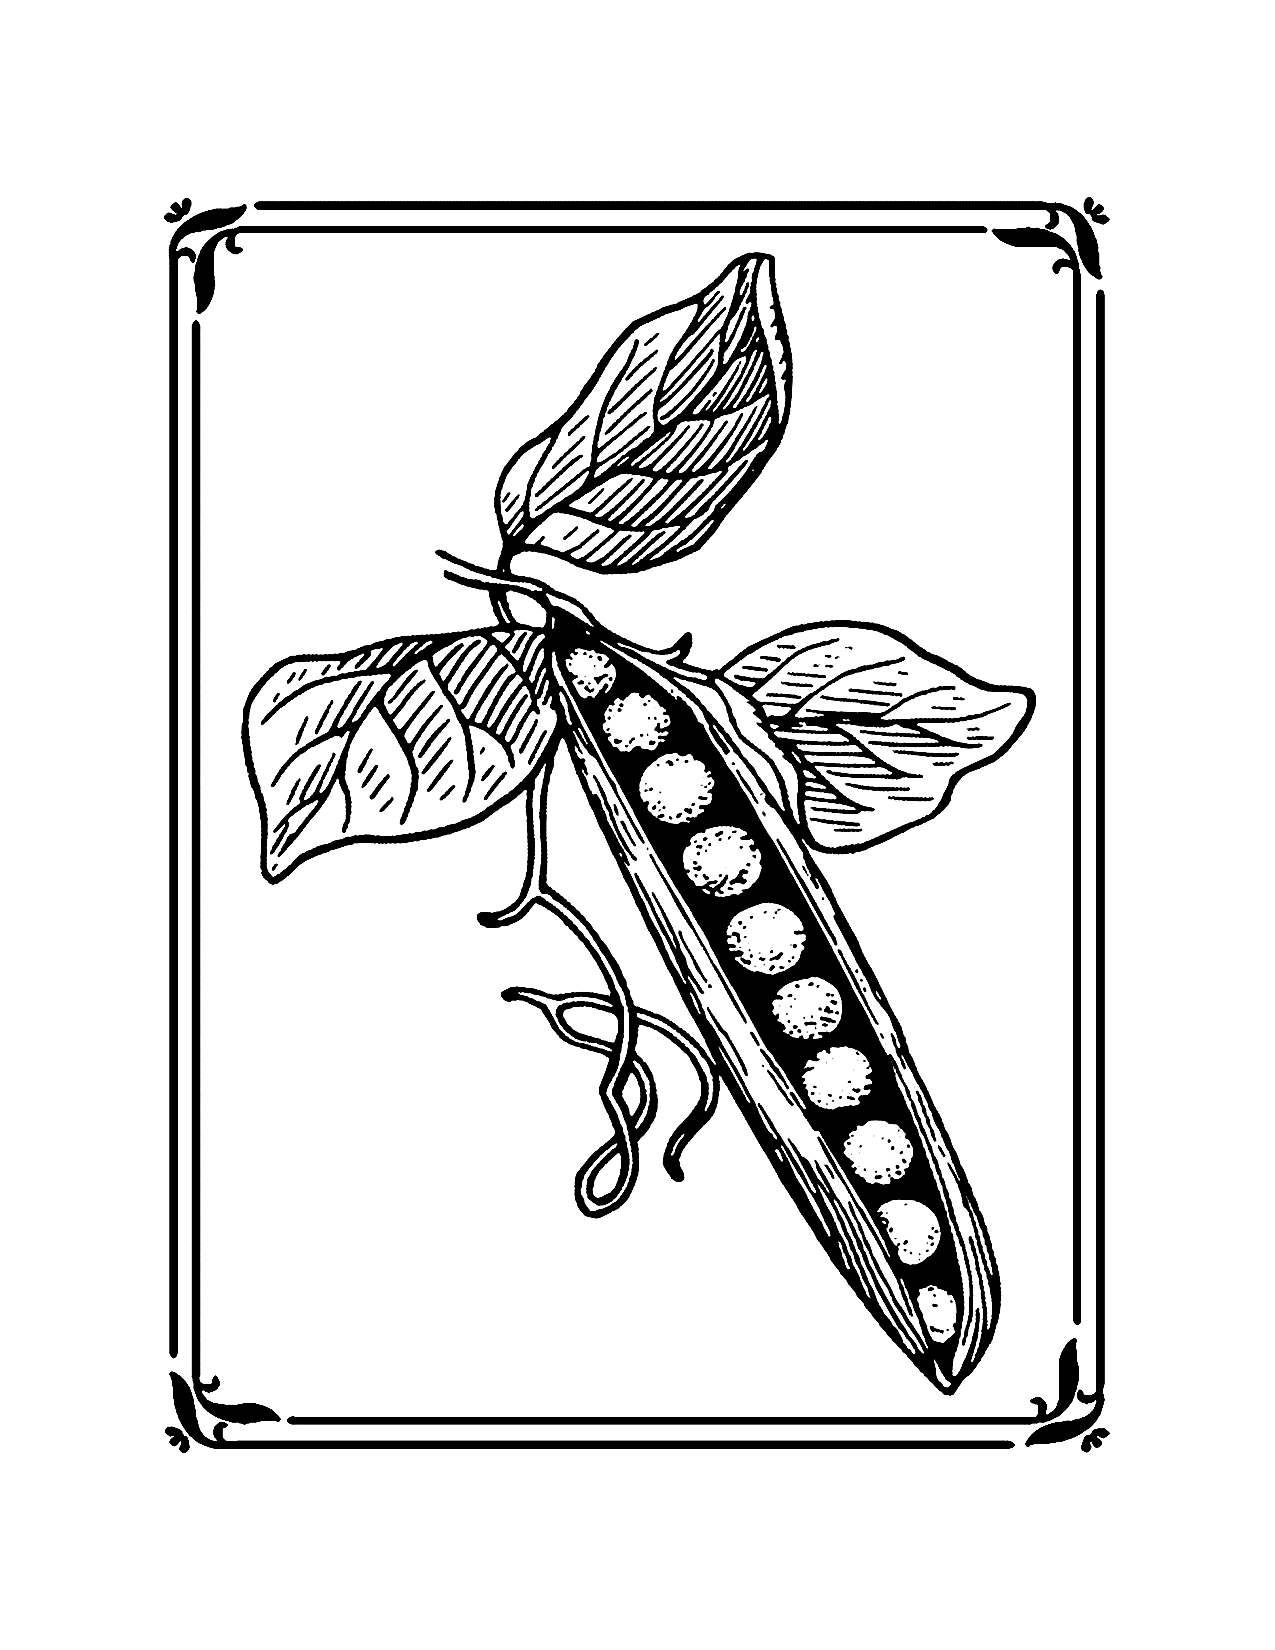 Pea On The Vine Coloring Page